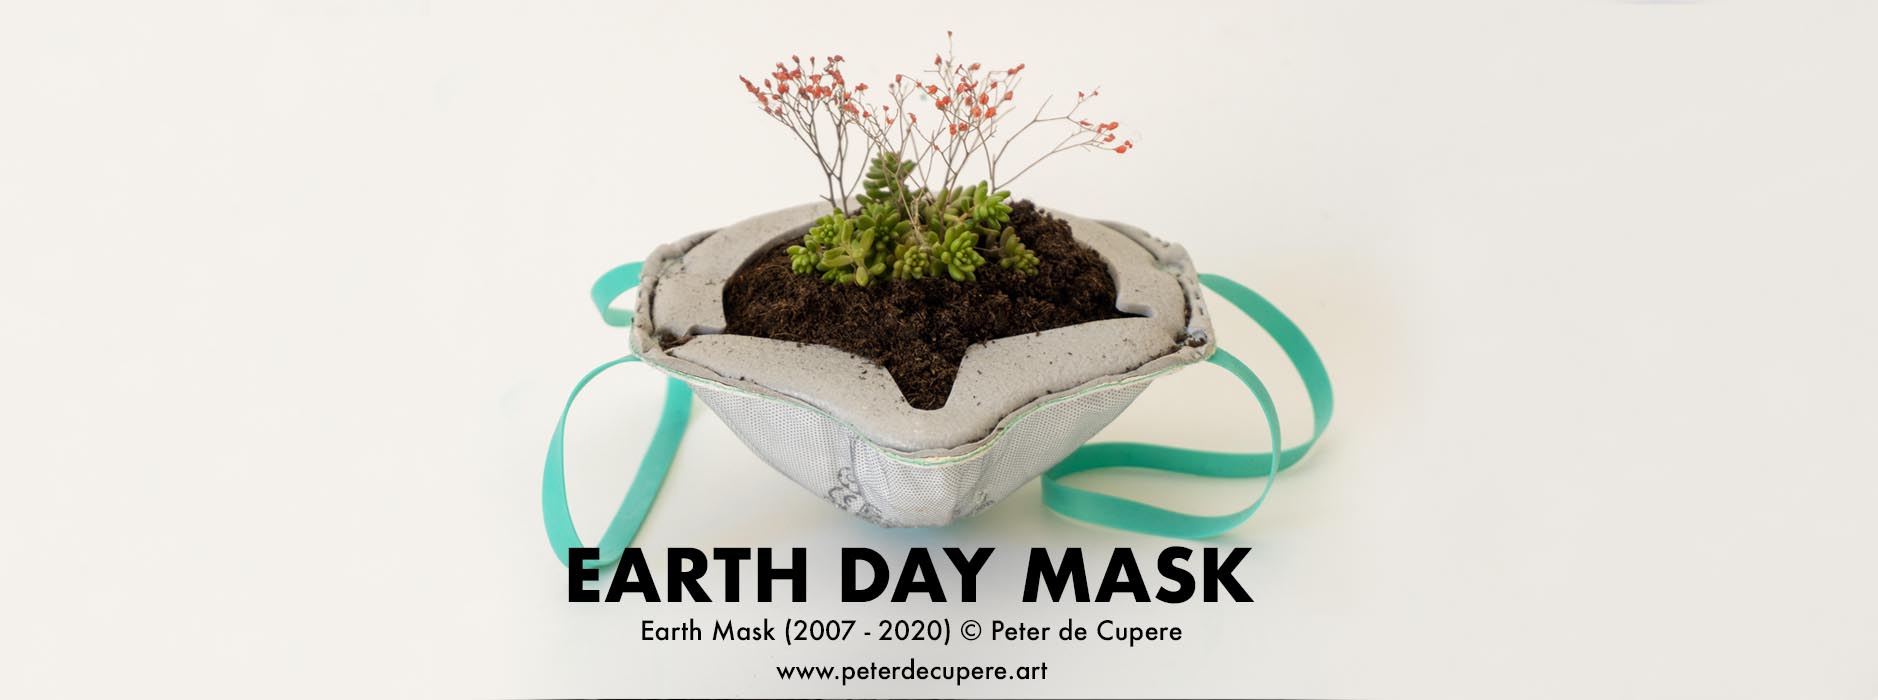 FB-earth-day-mask-Copyrights-Peter-de-Cupere-2007-2020-A001